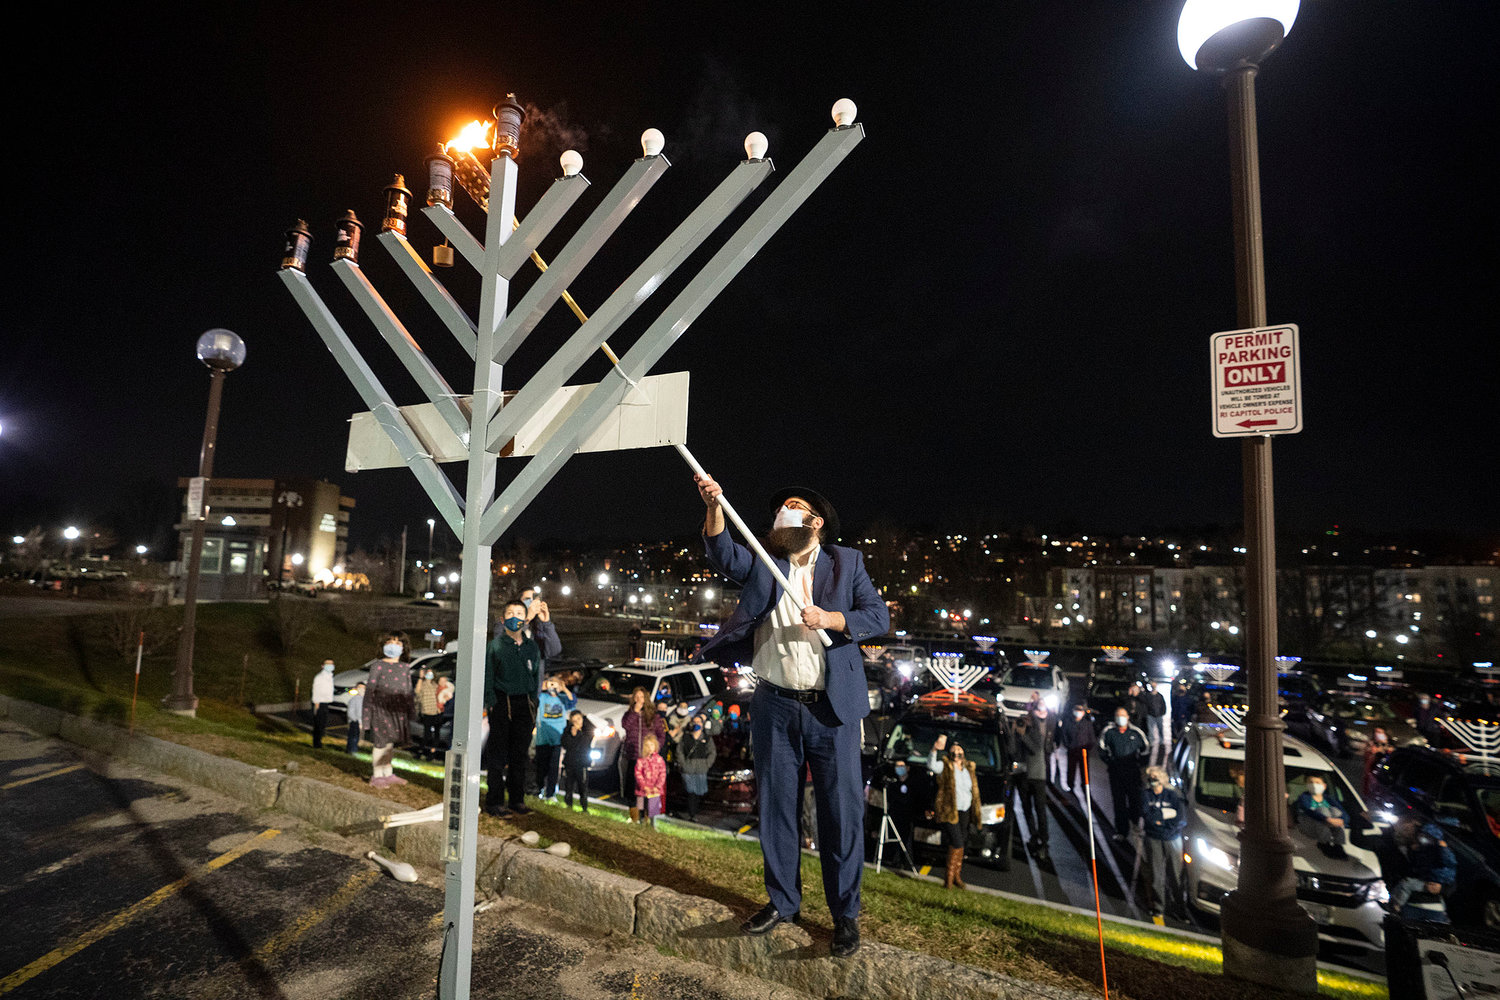 After a menorah car parade through Rhode Island on Dec. 13, 2020, Rabbi Aryeh Laufer lights the menorah set up outside the Rhode Island State House.